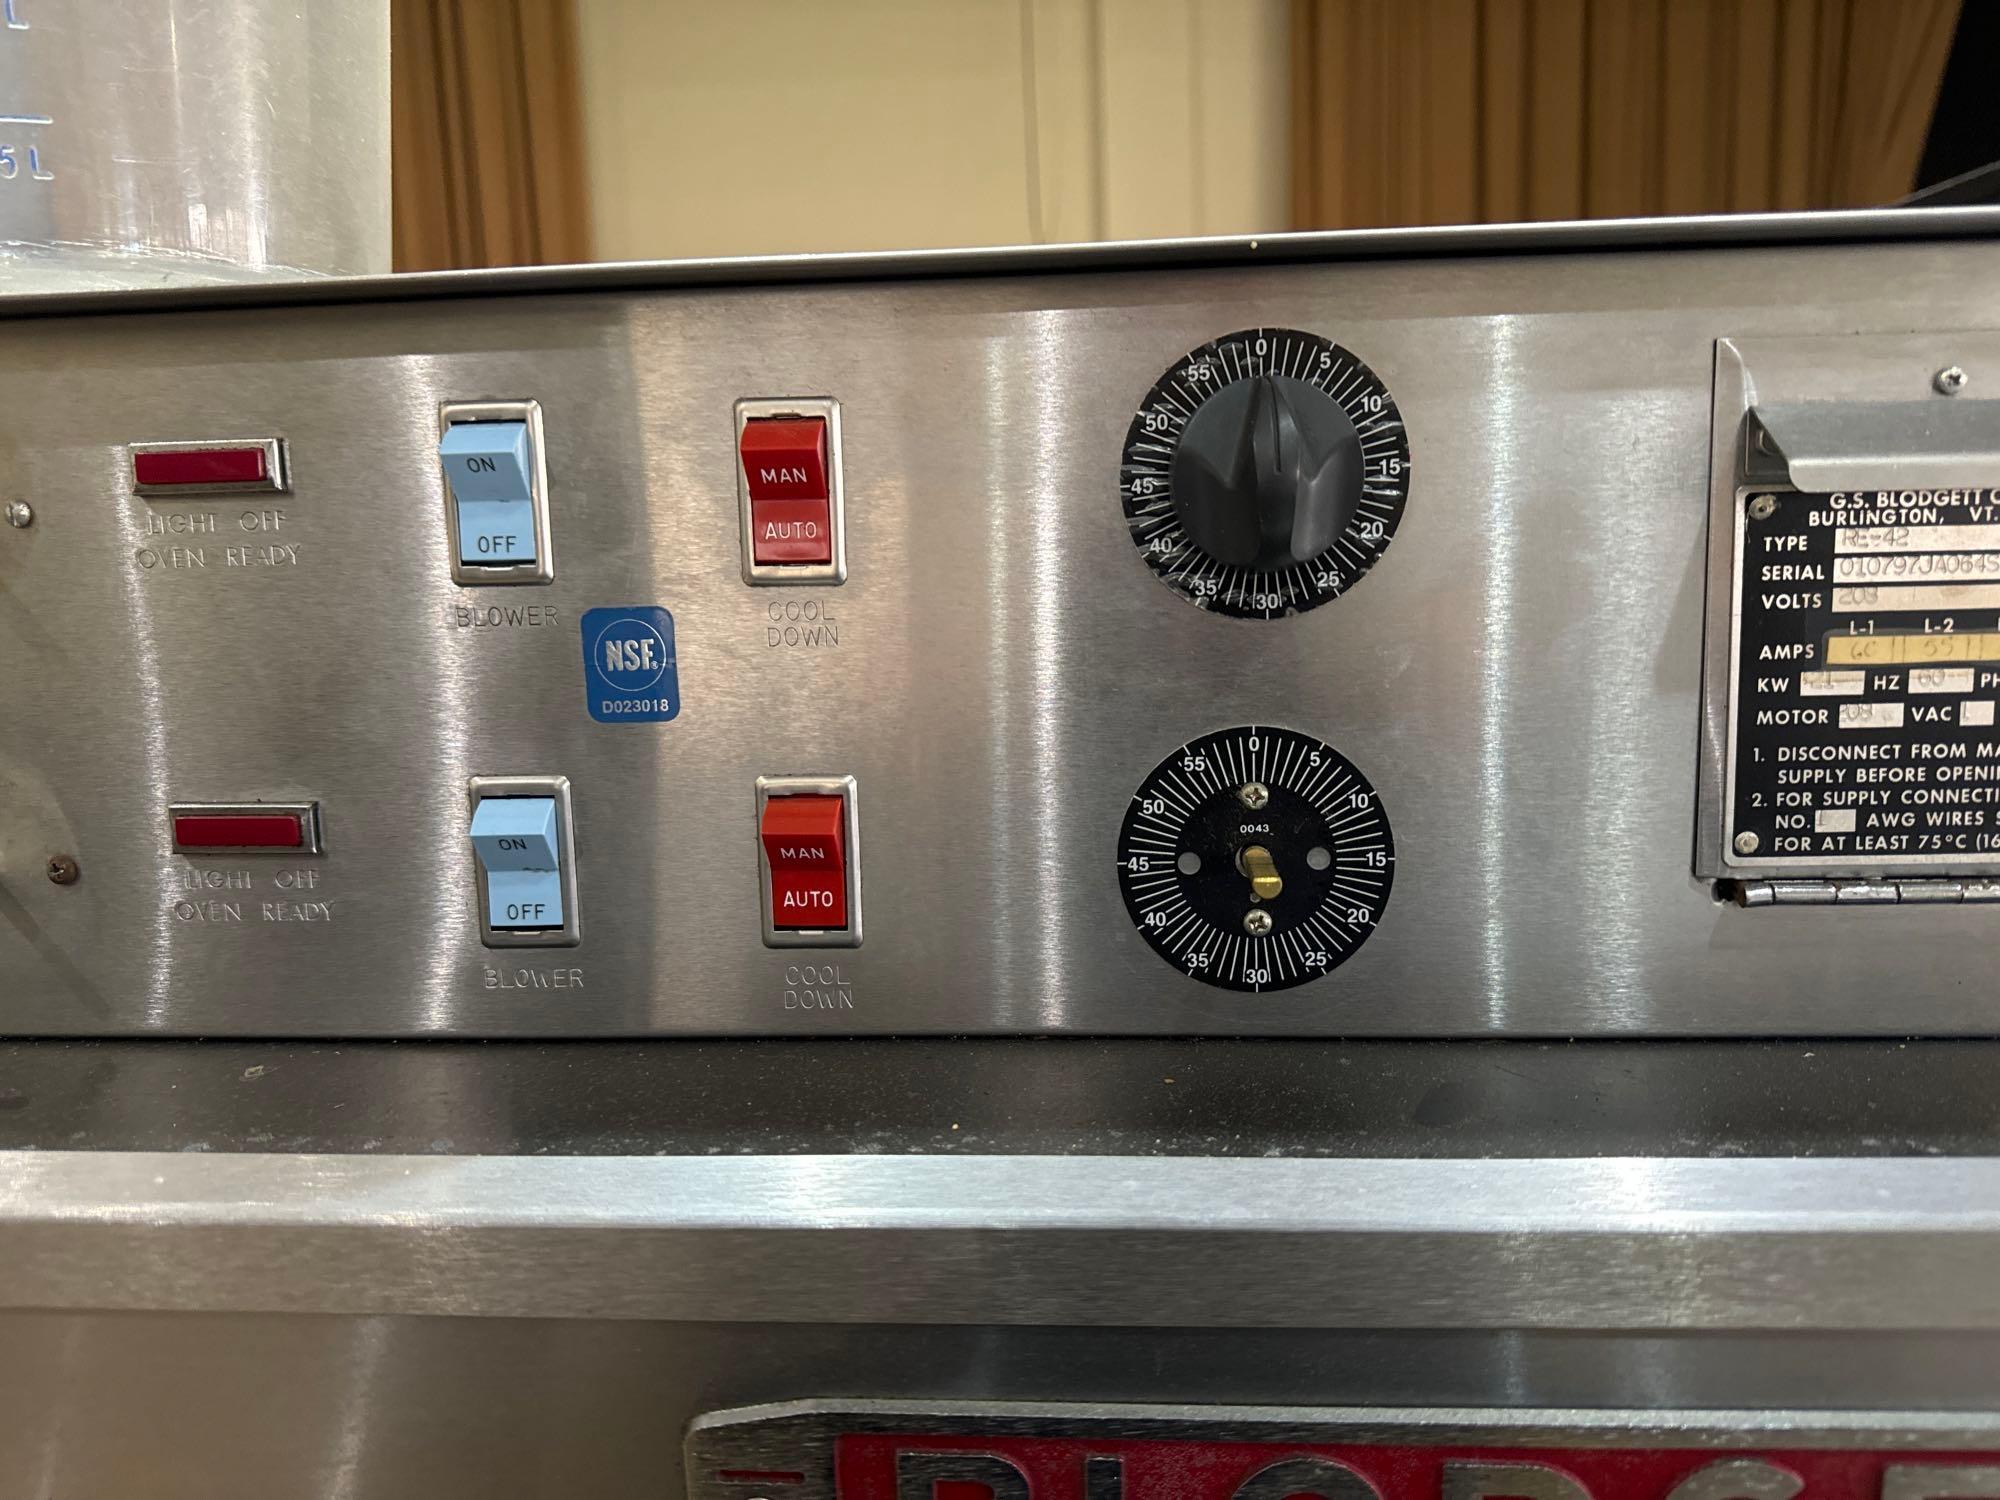 Blodgett RE42 stainless steel electric oven with racks